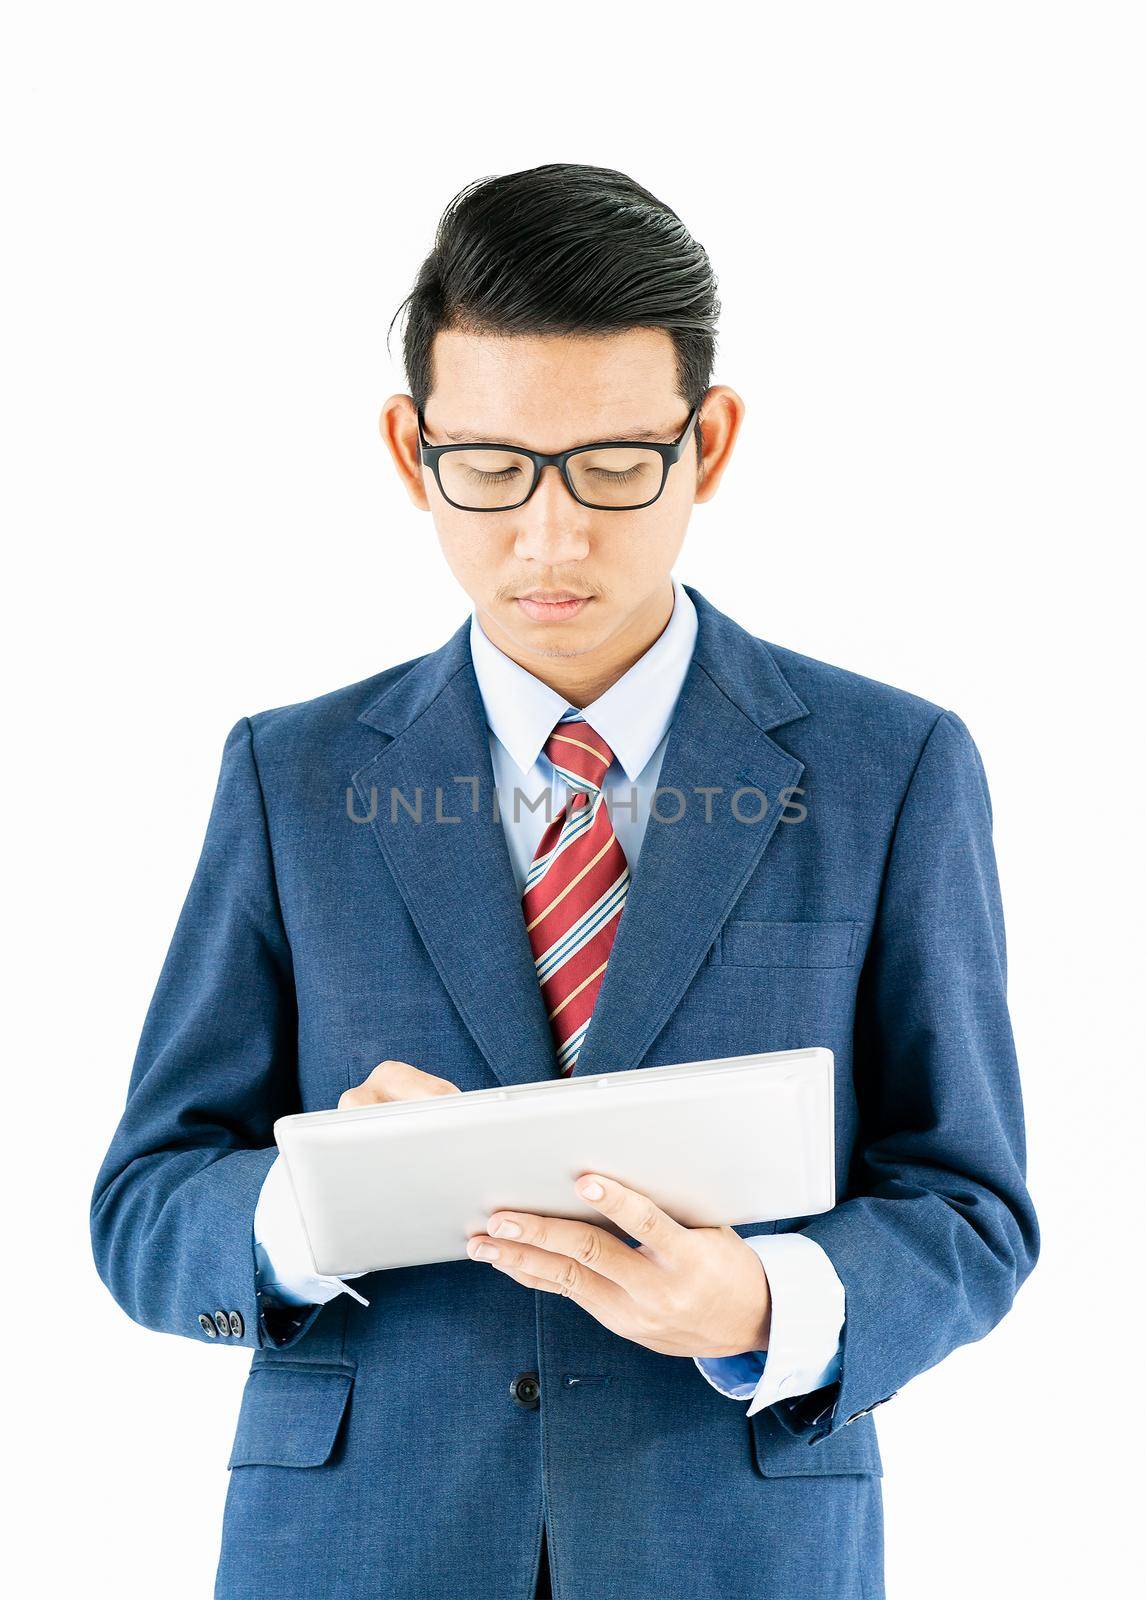 Young asian businessman portrait in suit and wear glasses holding a laptop over white background